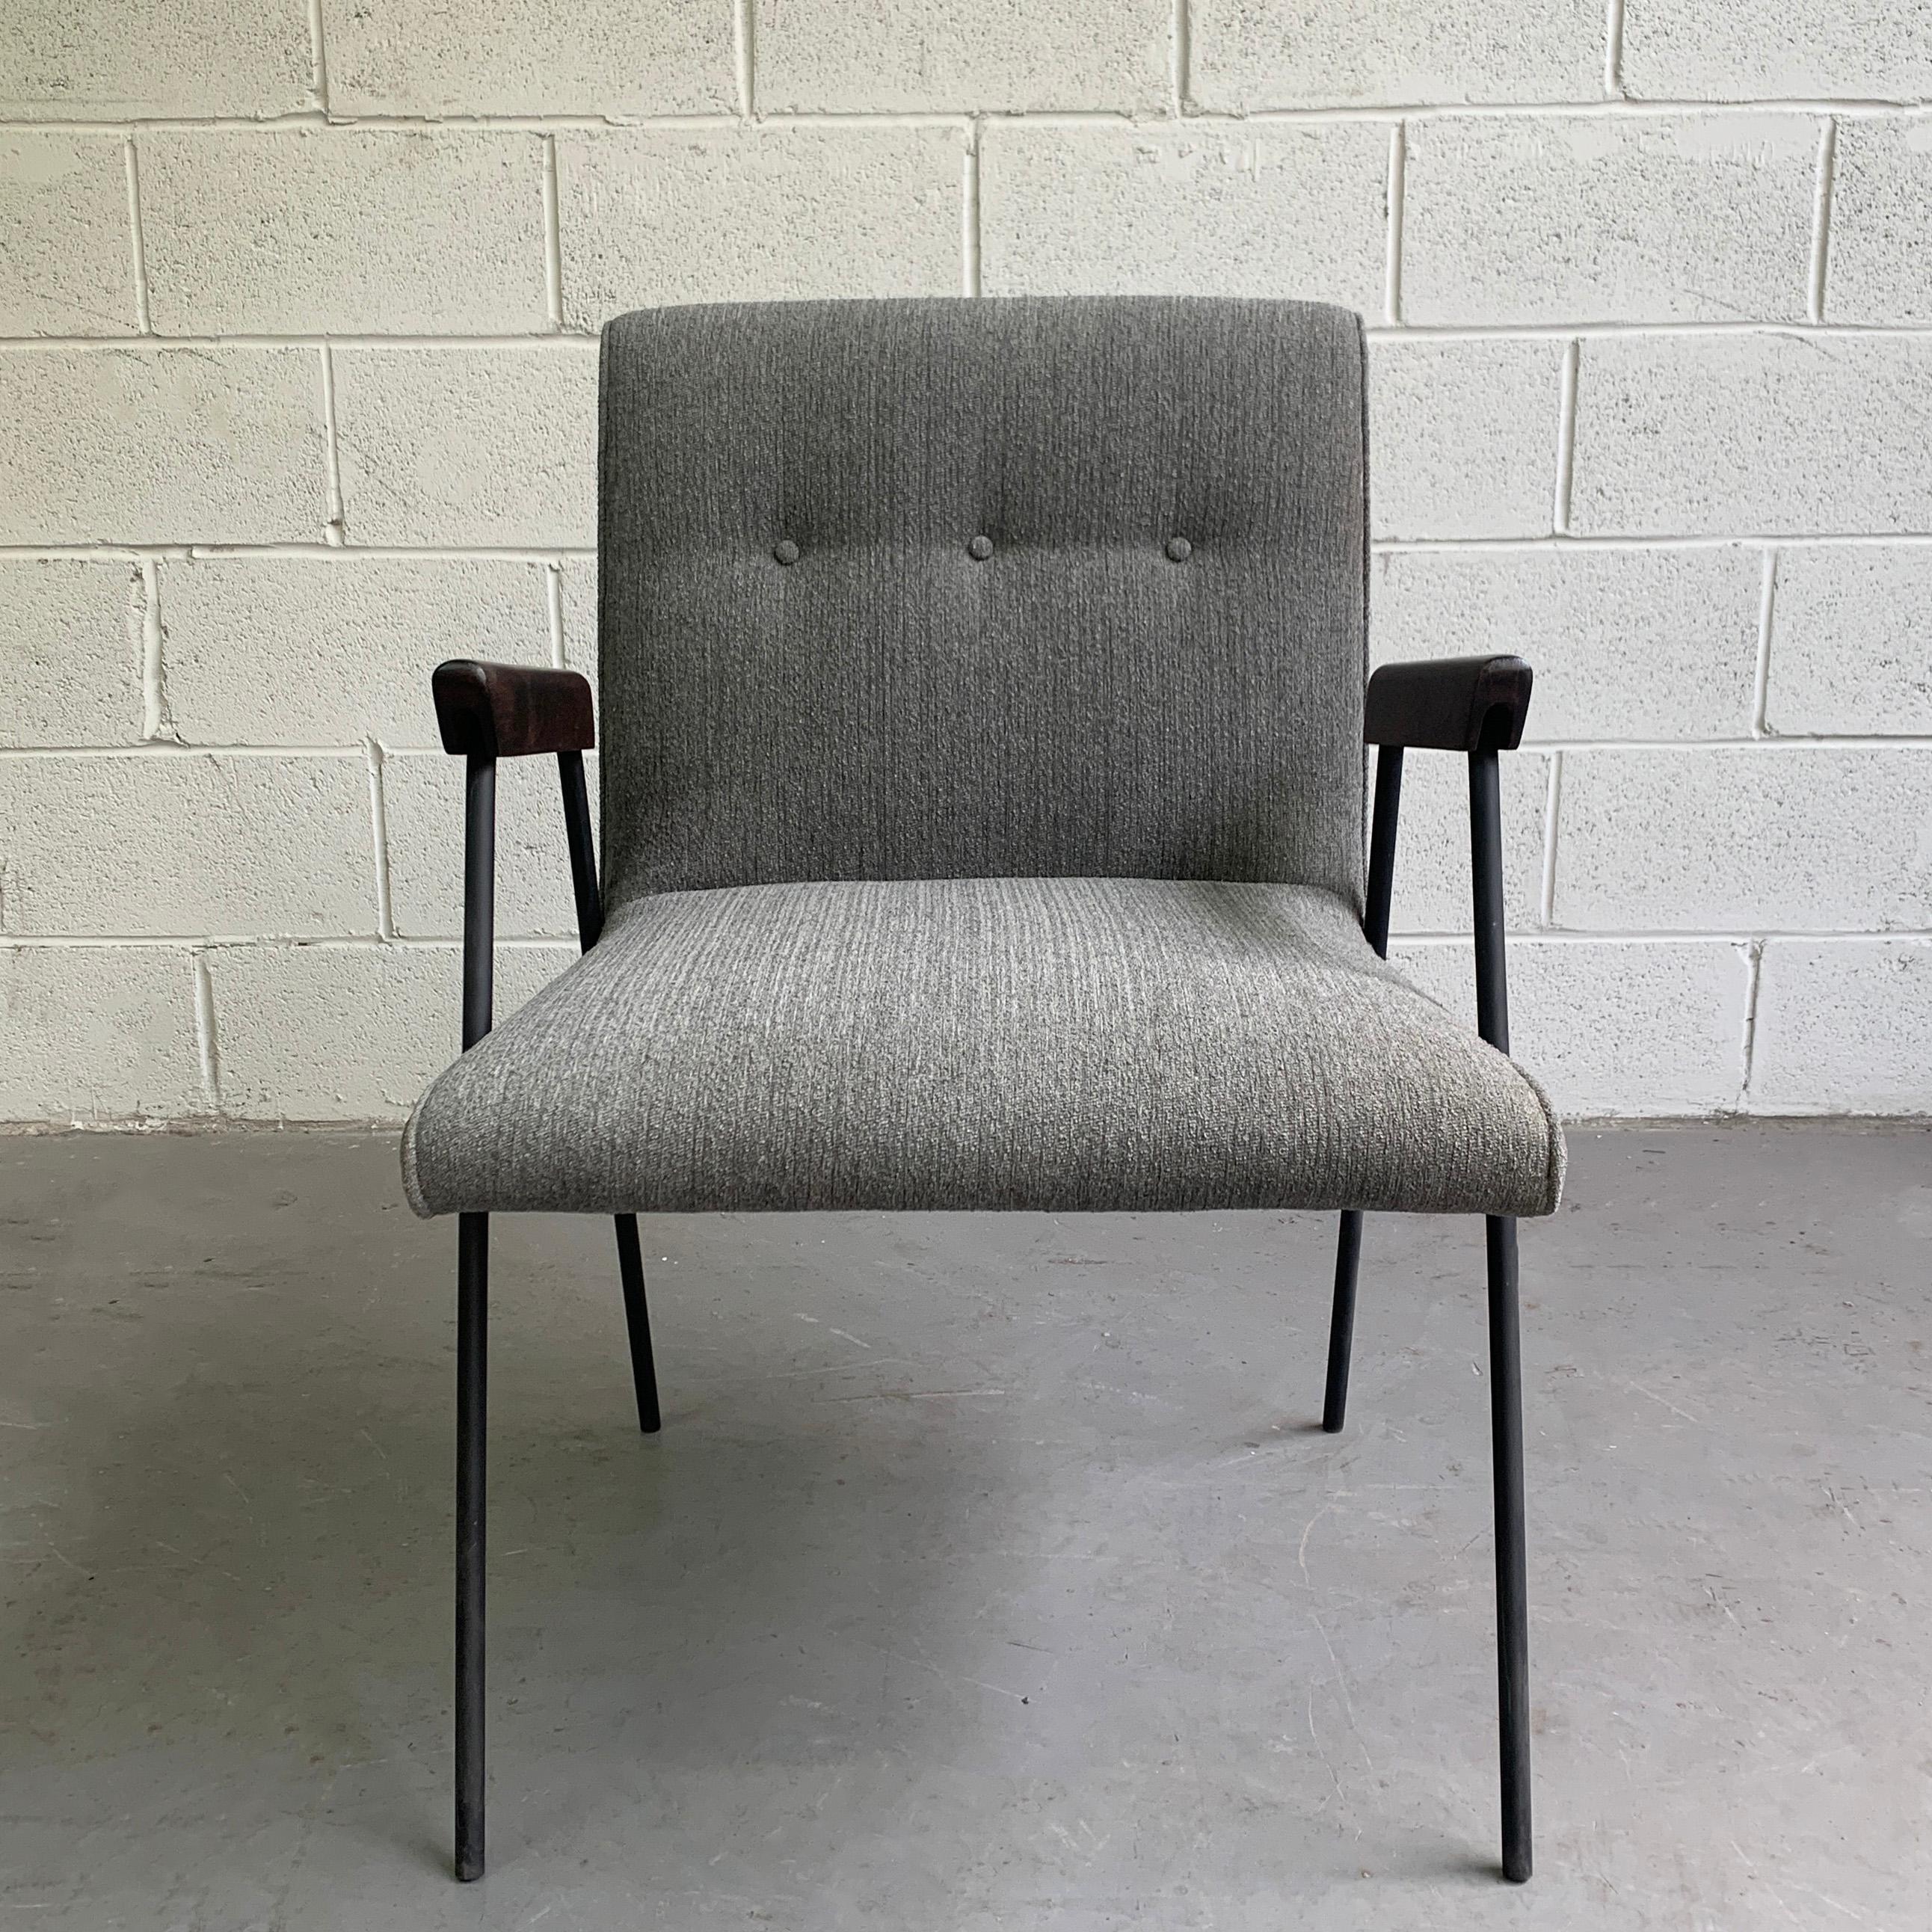 Wrought Iron Upholstered Armchair Attributed to Milo Baughman, Pacific Iron 1